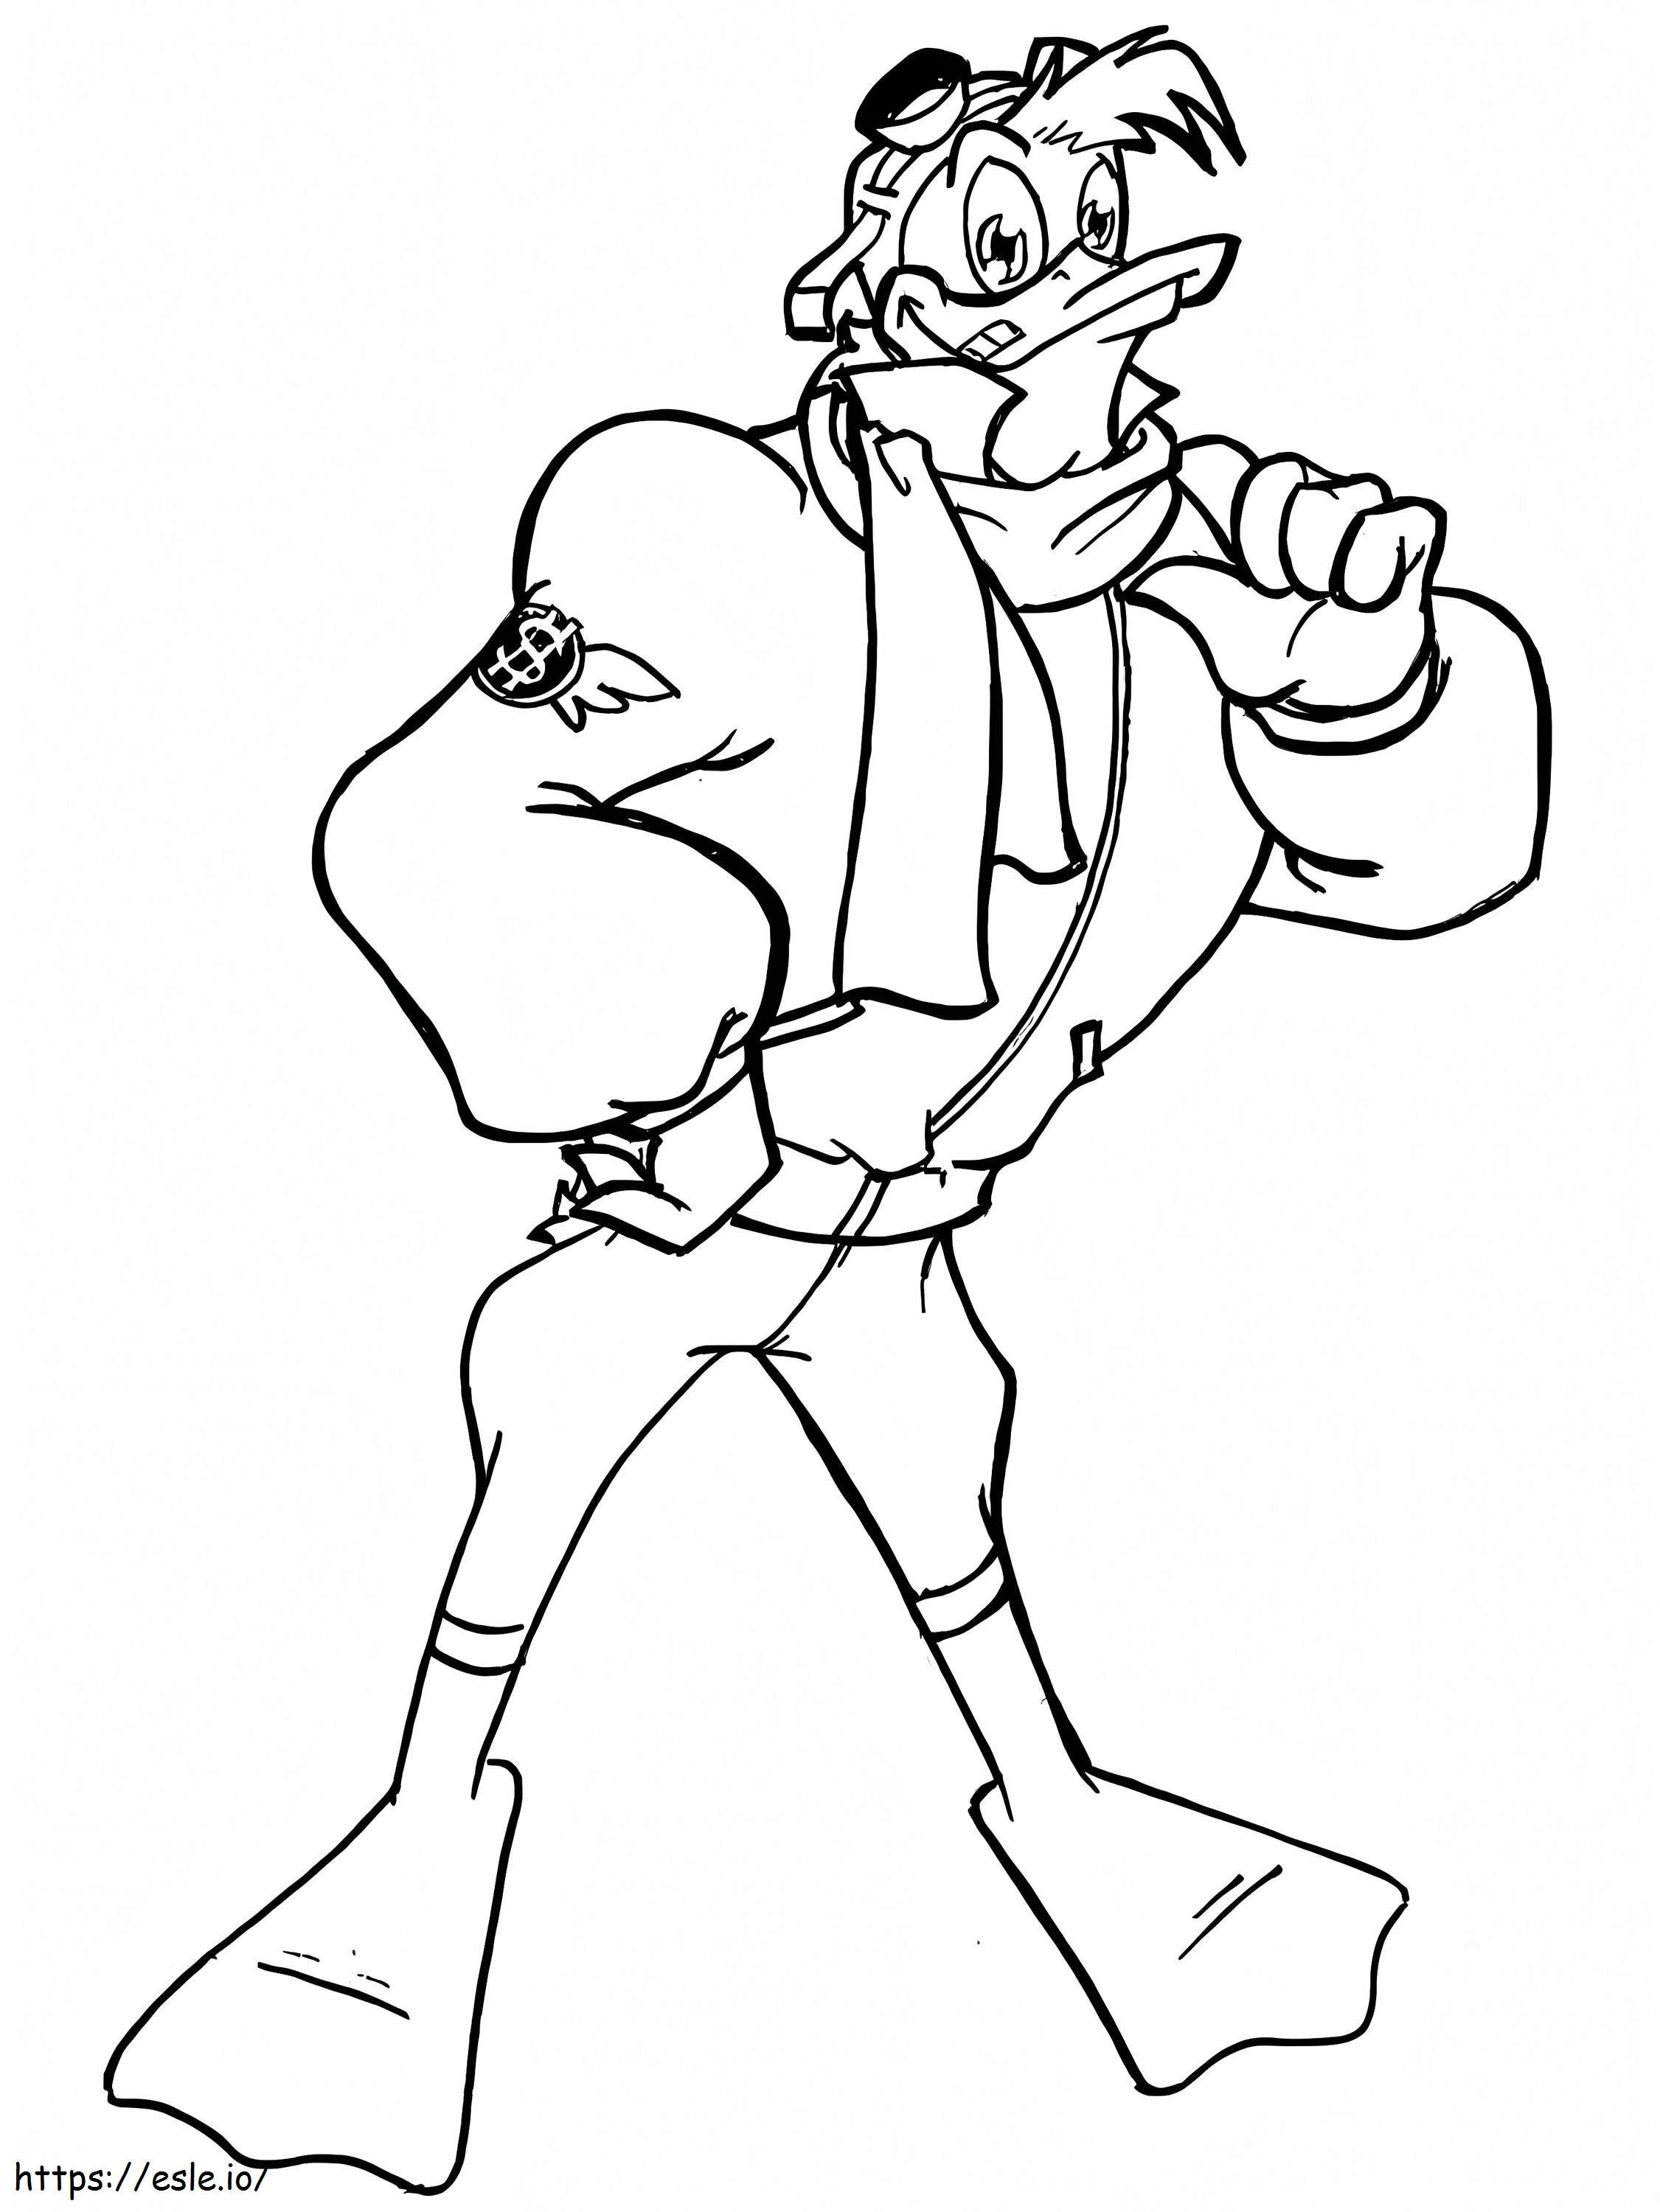 Launchpad Mcquack The Ducktales coloring page